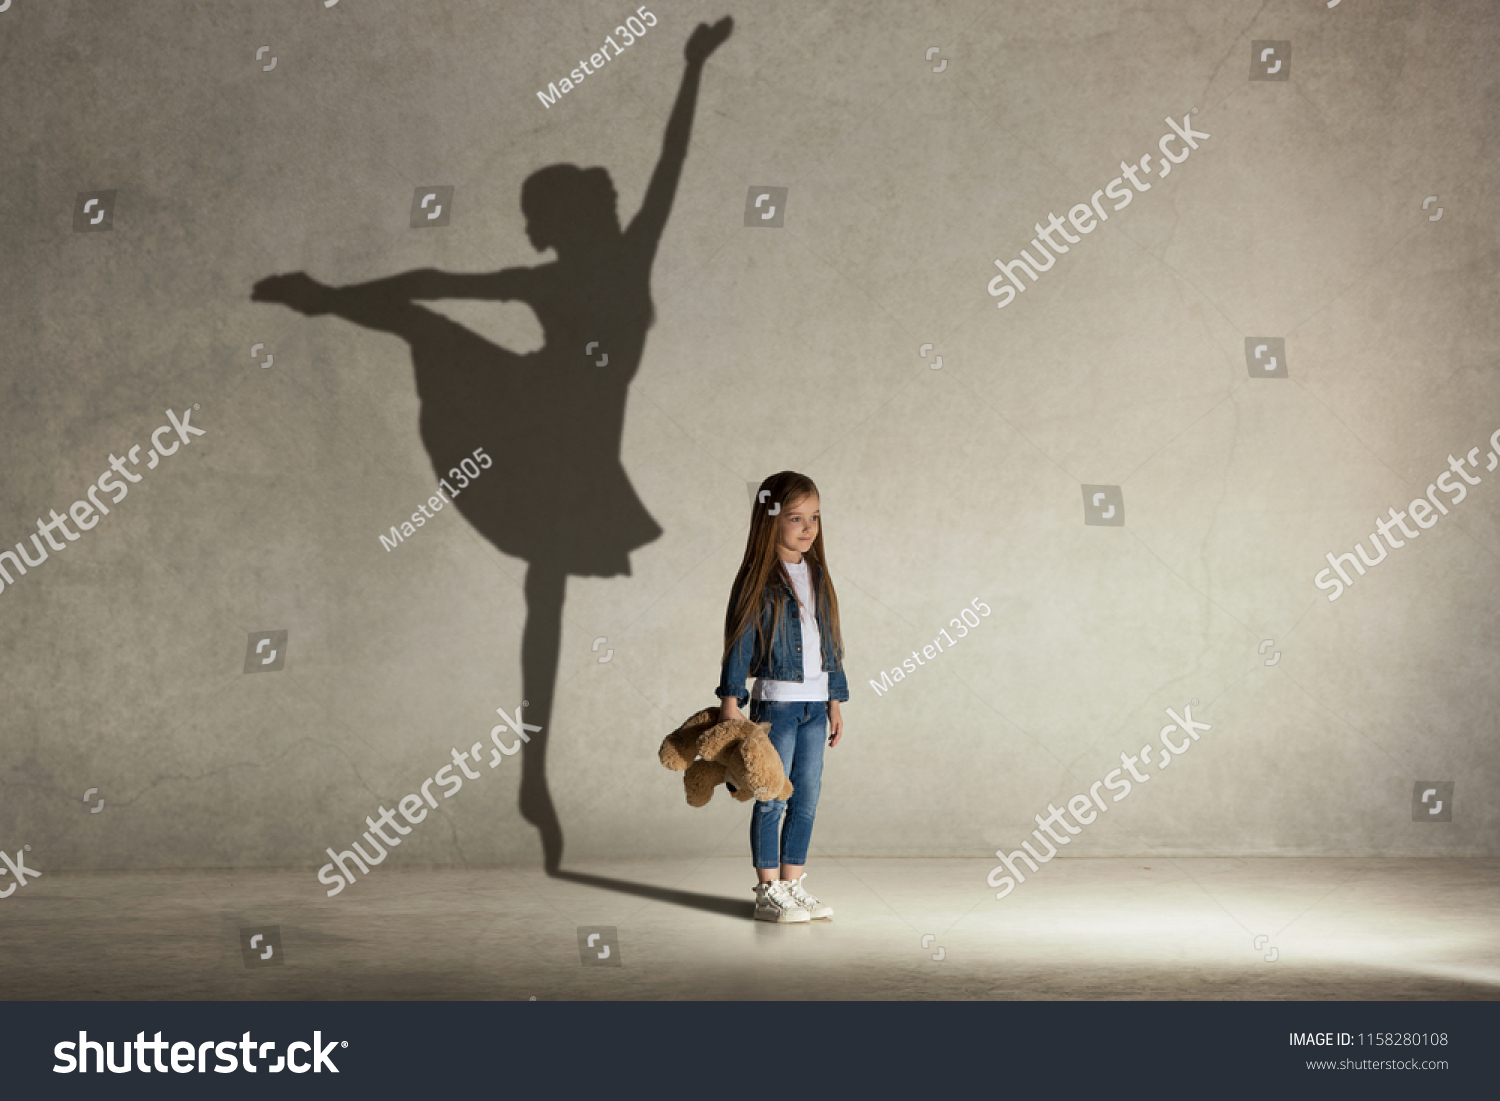 Baby girl dreaming about dancing ballet. Childhood and dream concept. Conceptual image with shadow of ballerina on the studio wall #1158280108